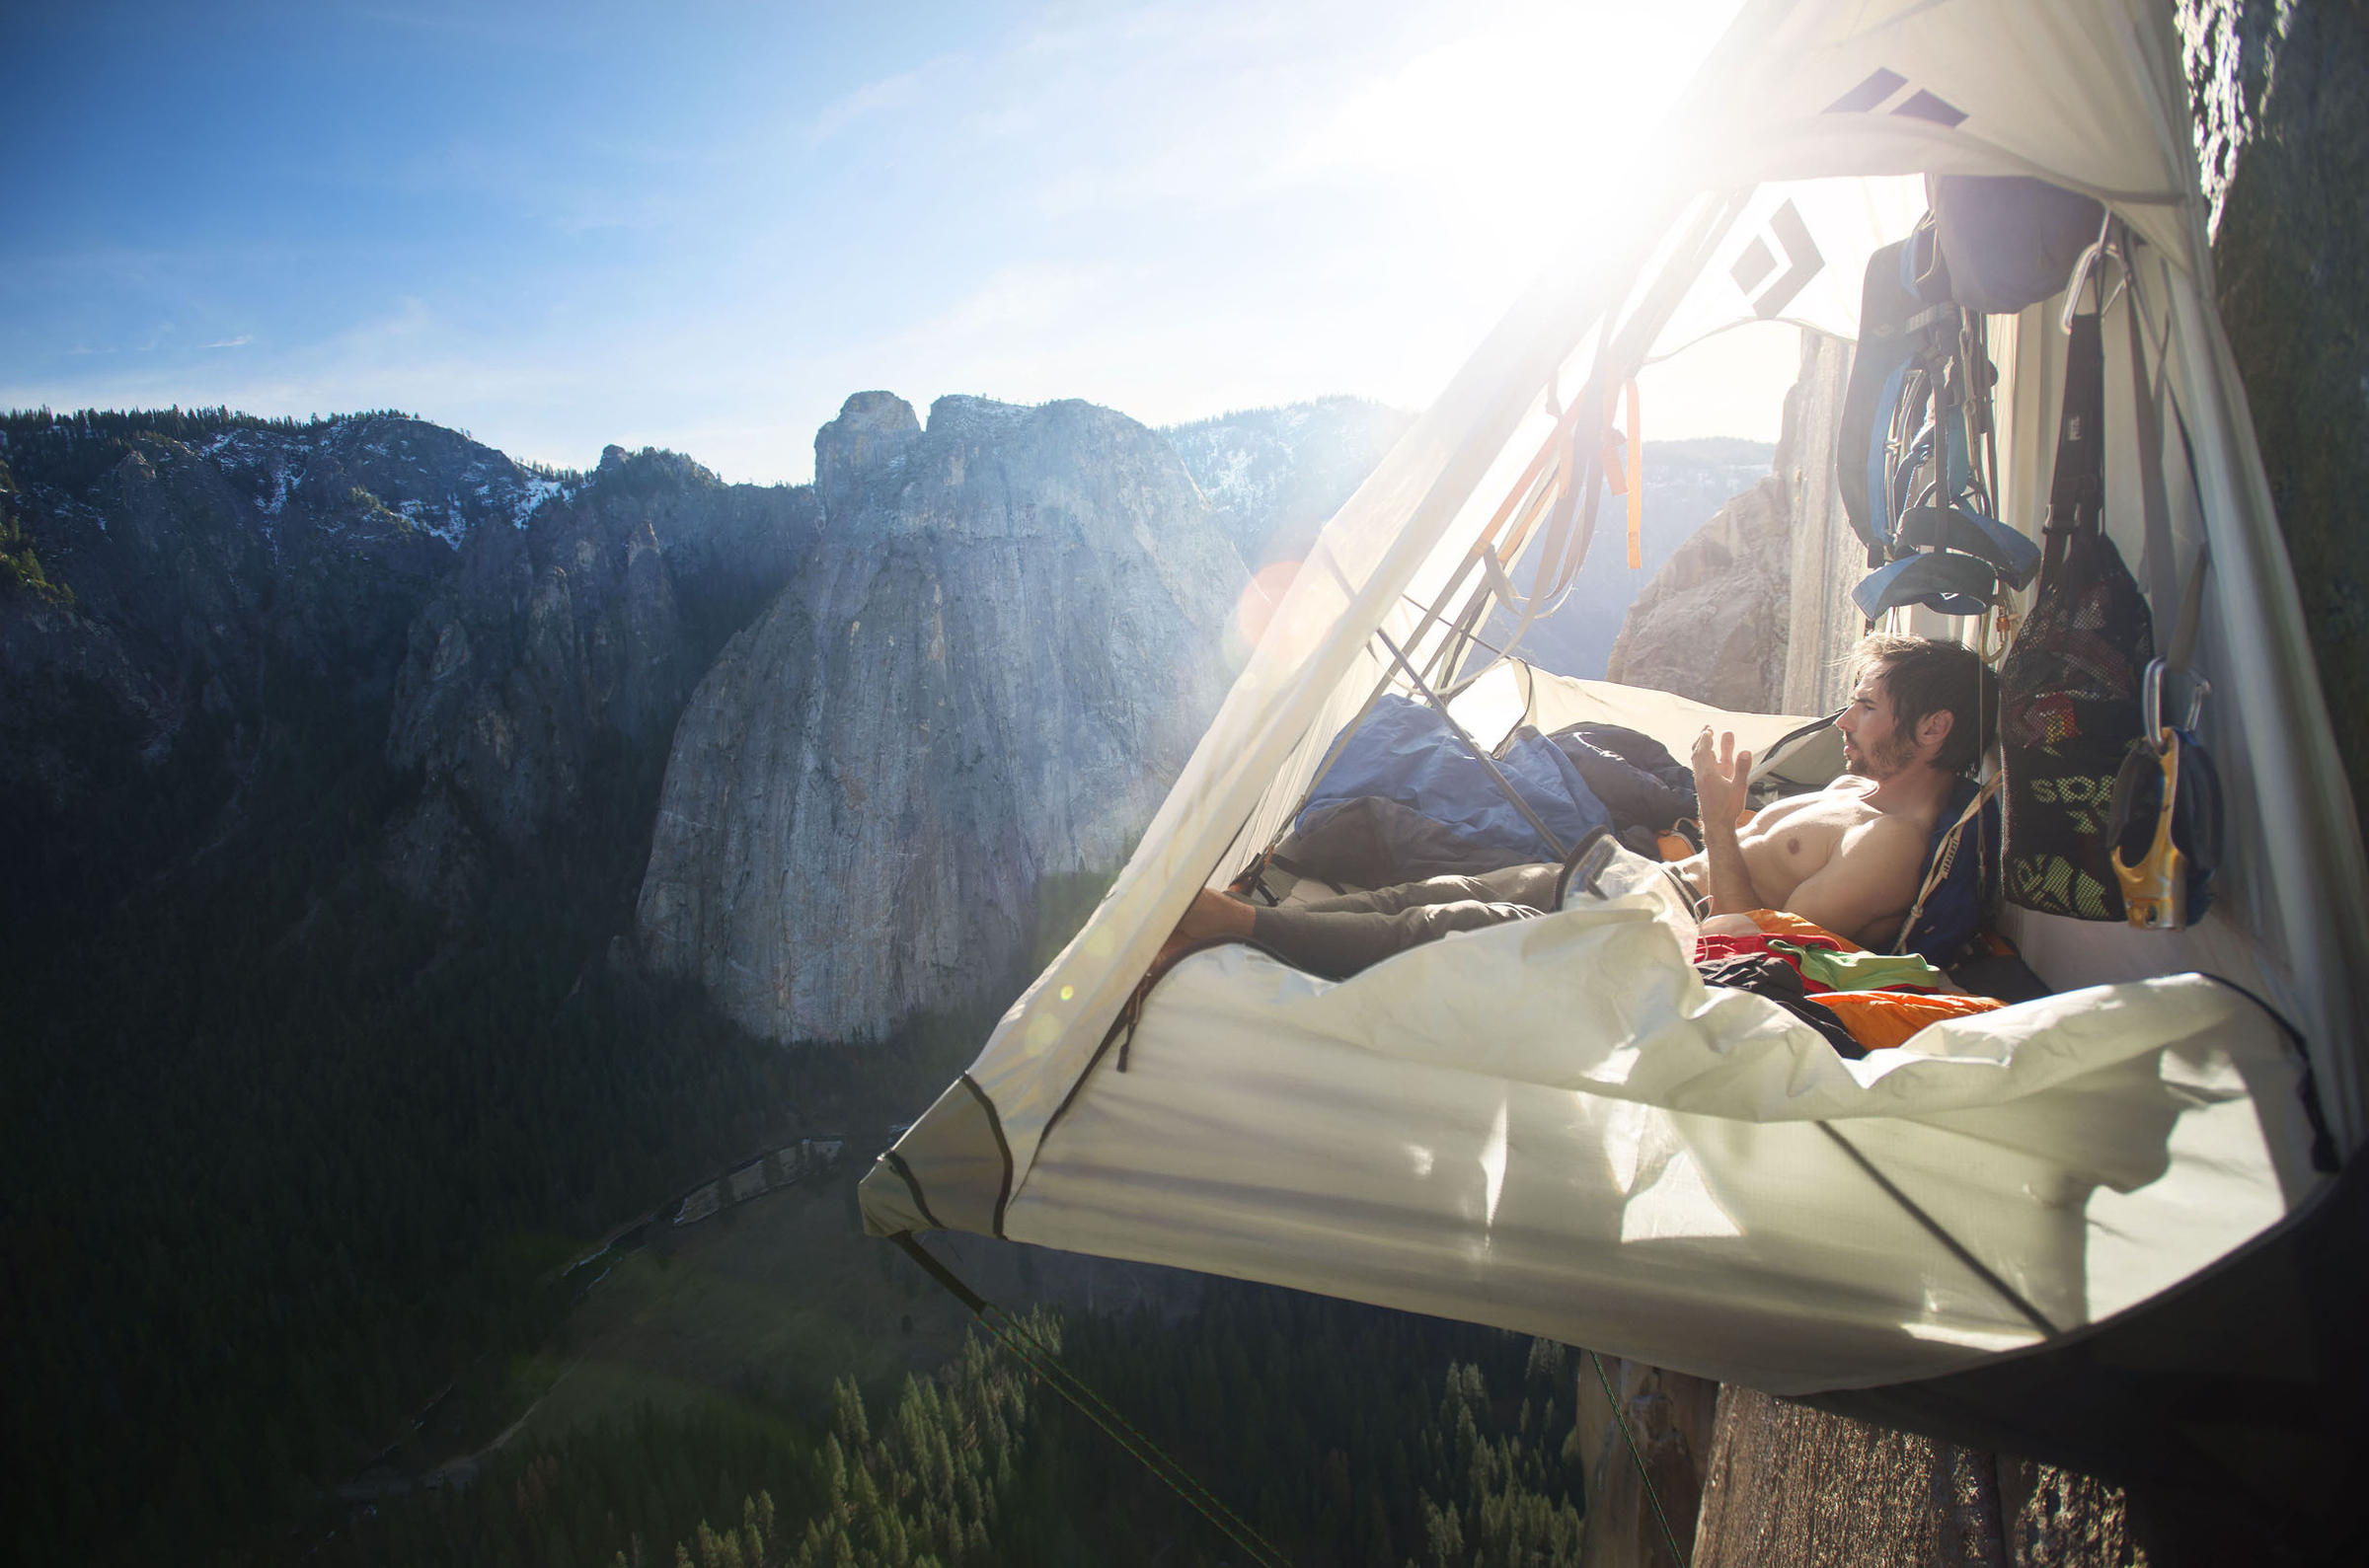 Free-Climbing Yosemite's El Capitan Takes A Team — And Time | West